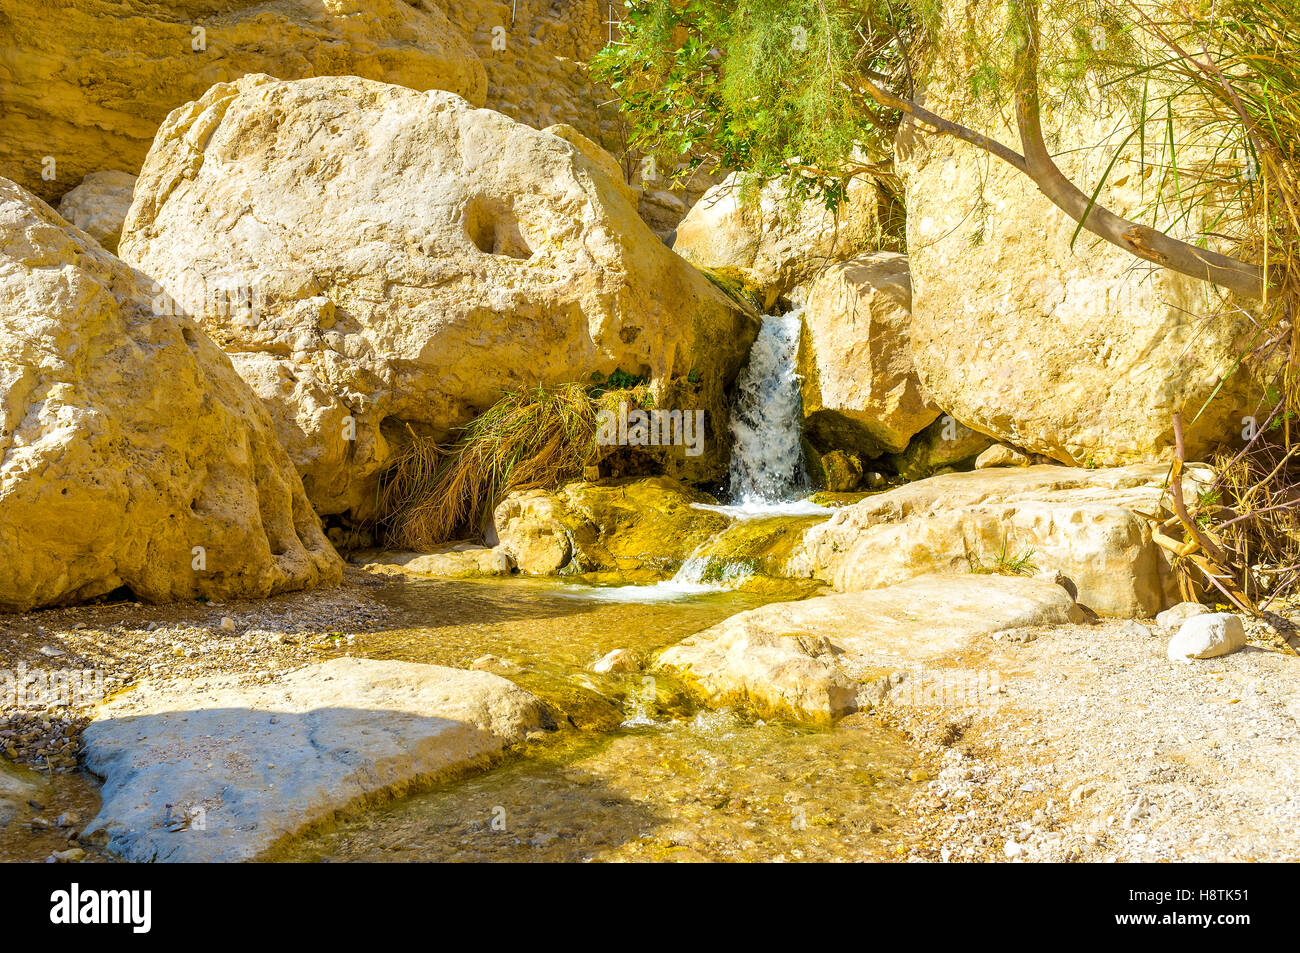 The mountain river with the tiny falls in Ein Gedi oasis, Judean desert, Israel. Stock Photo